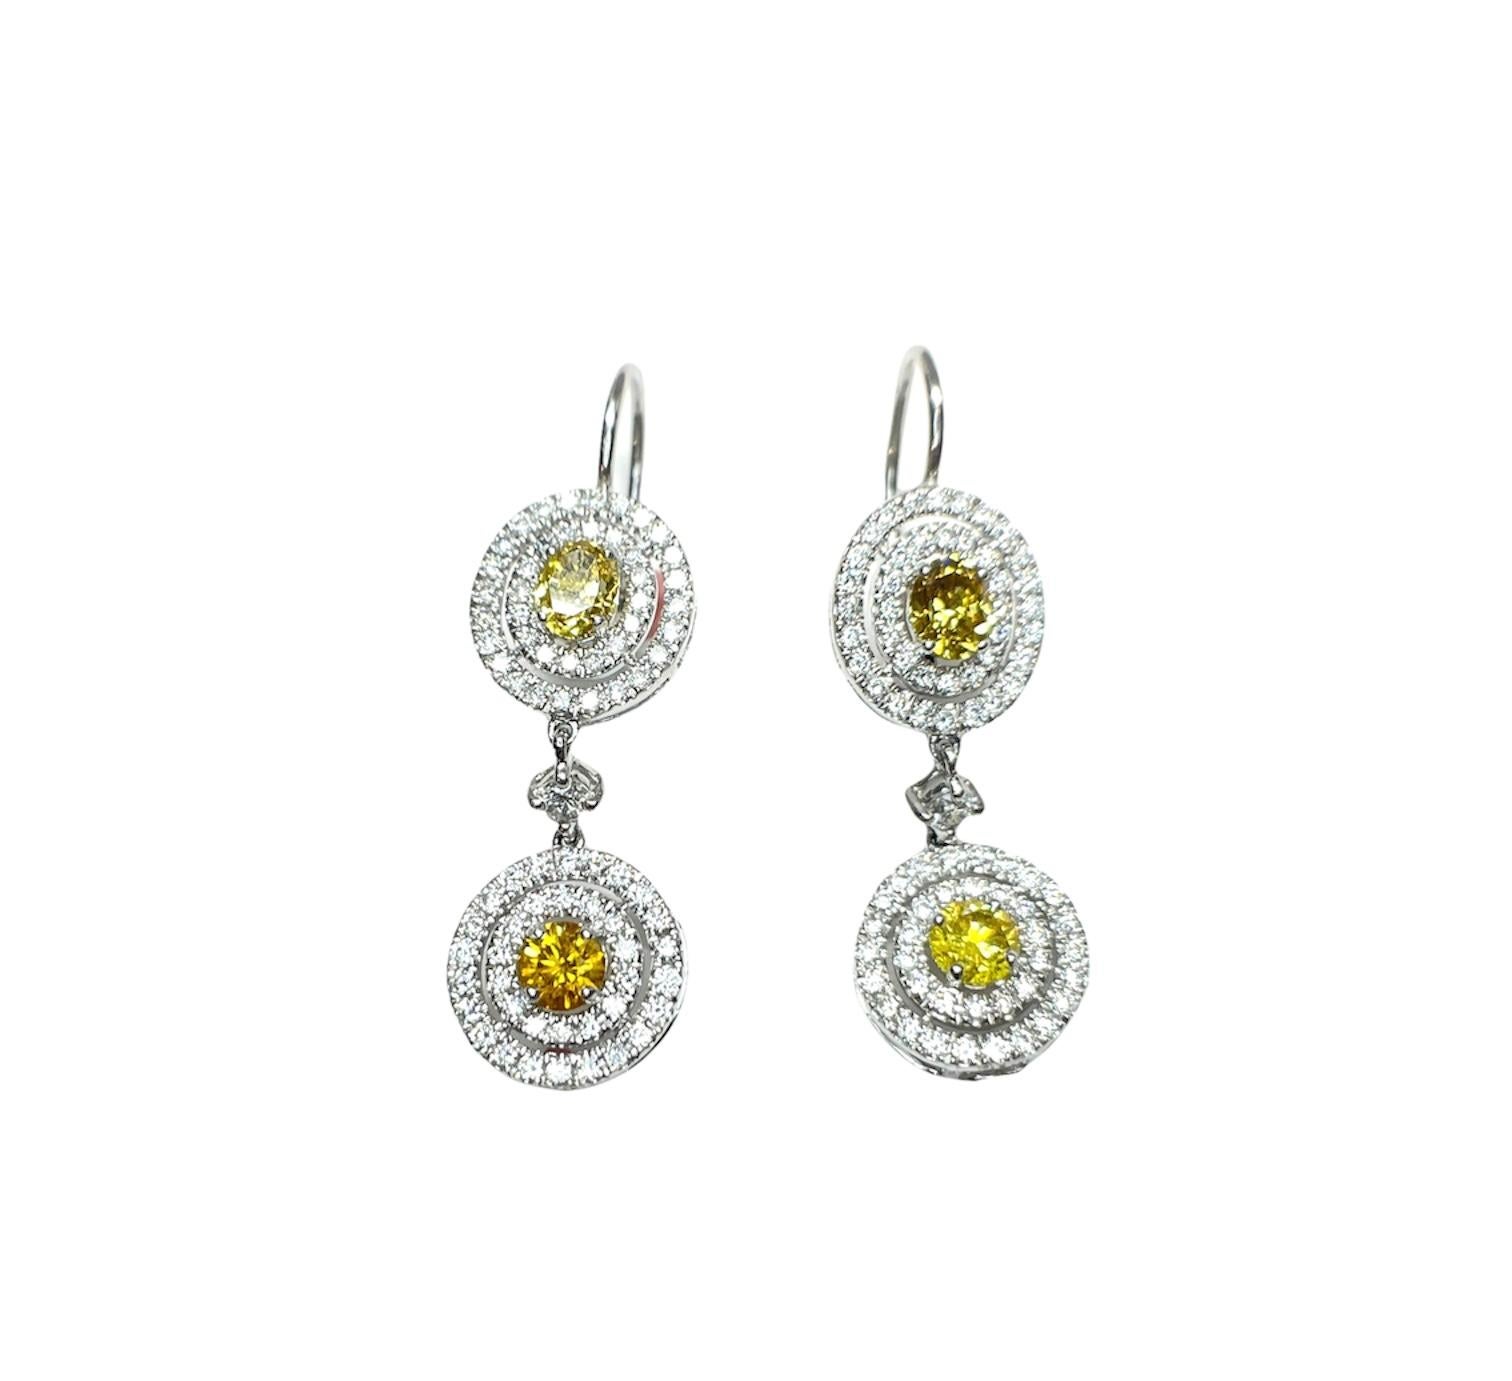 These stunning multi-color diamond earrings feature 4 natural color diamonds GIA certified weighing 1.60cts and 151 diamonds weighing 1.78cts set in platinum.